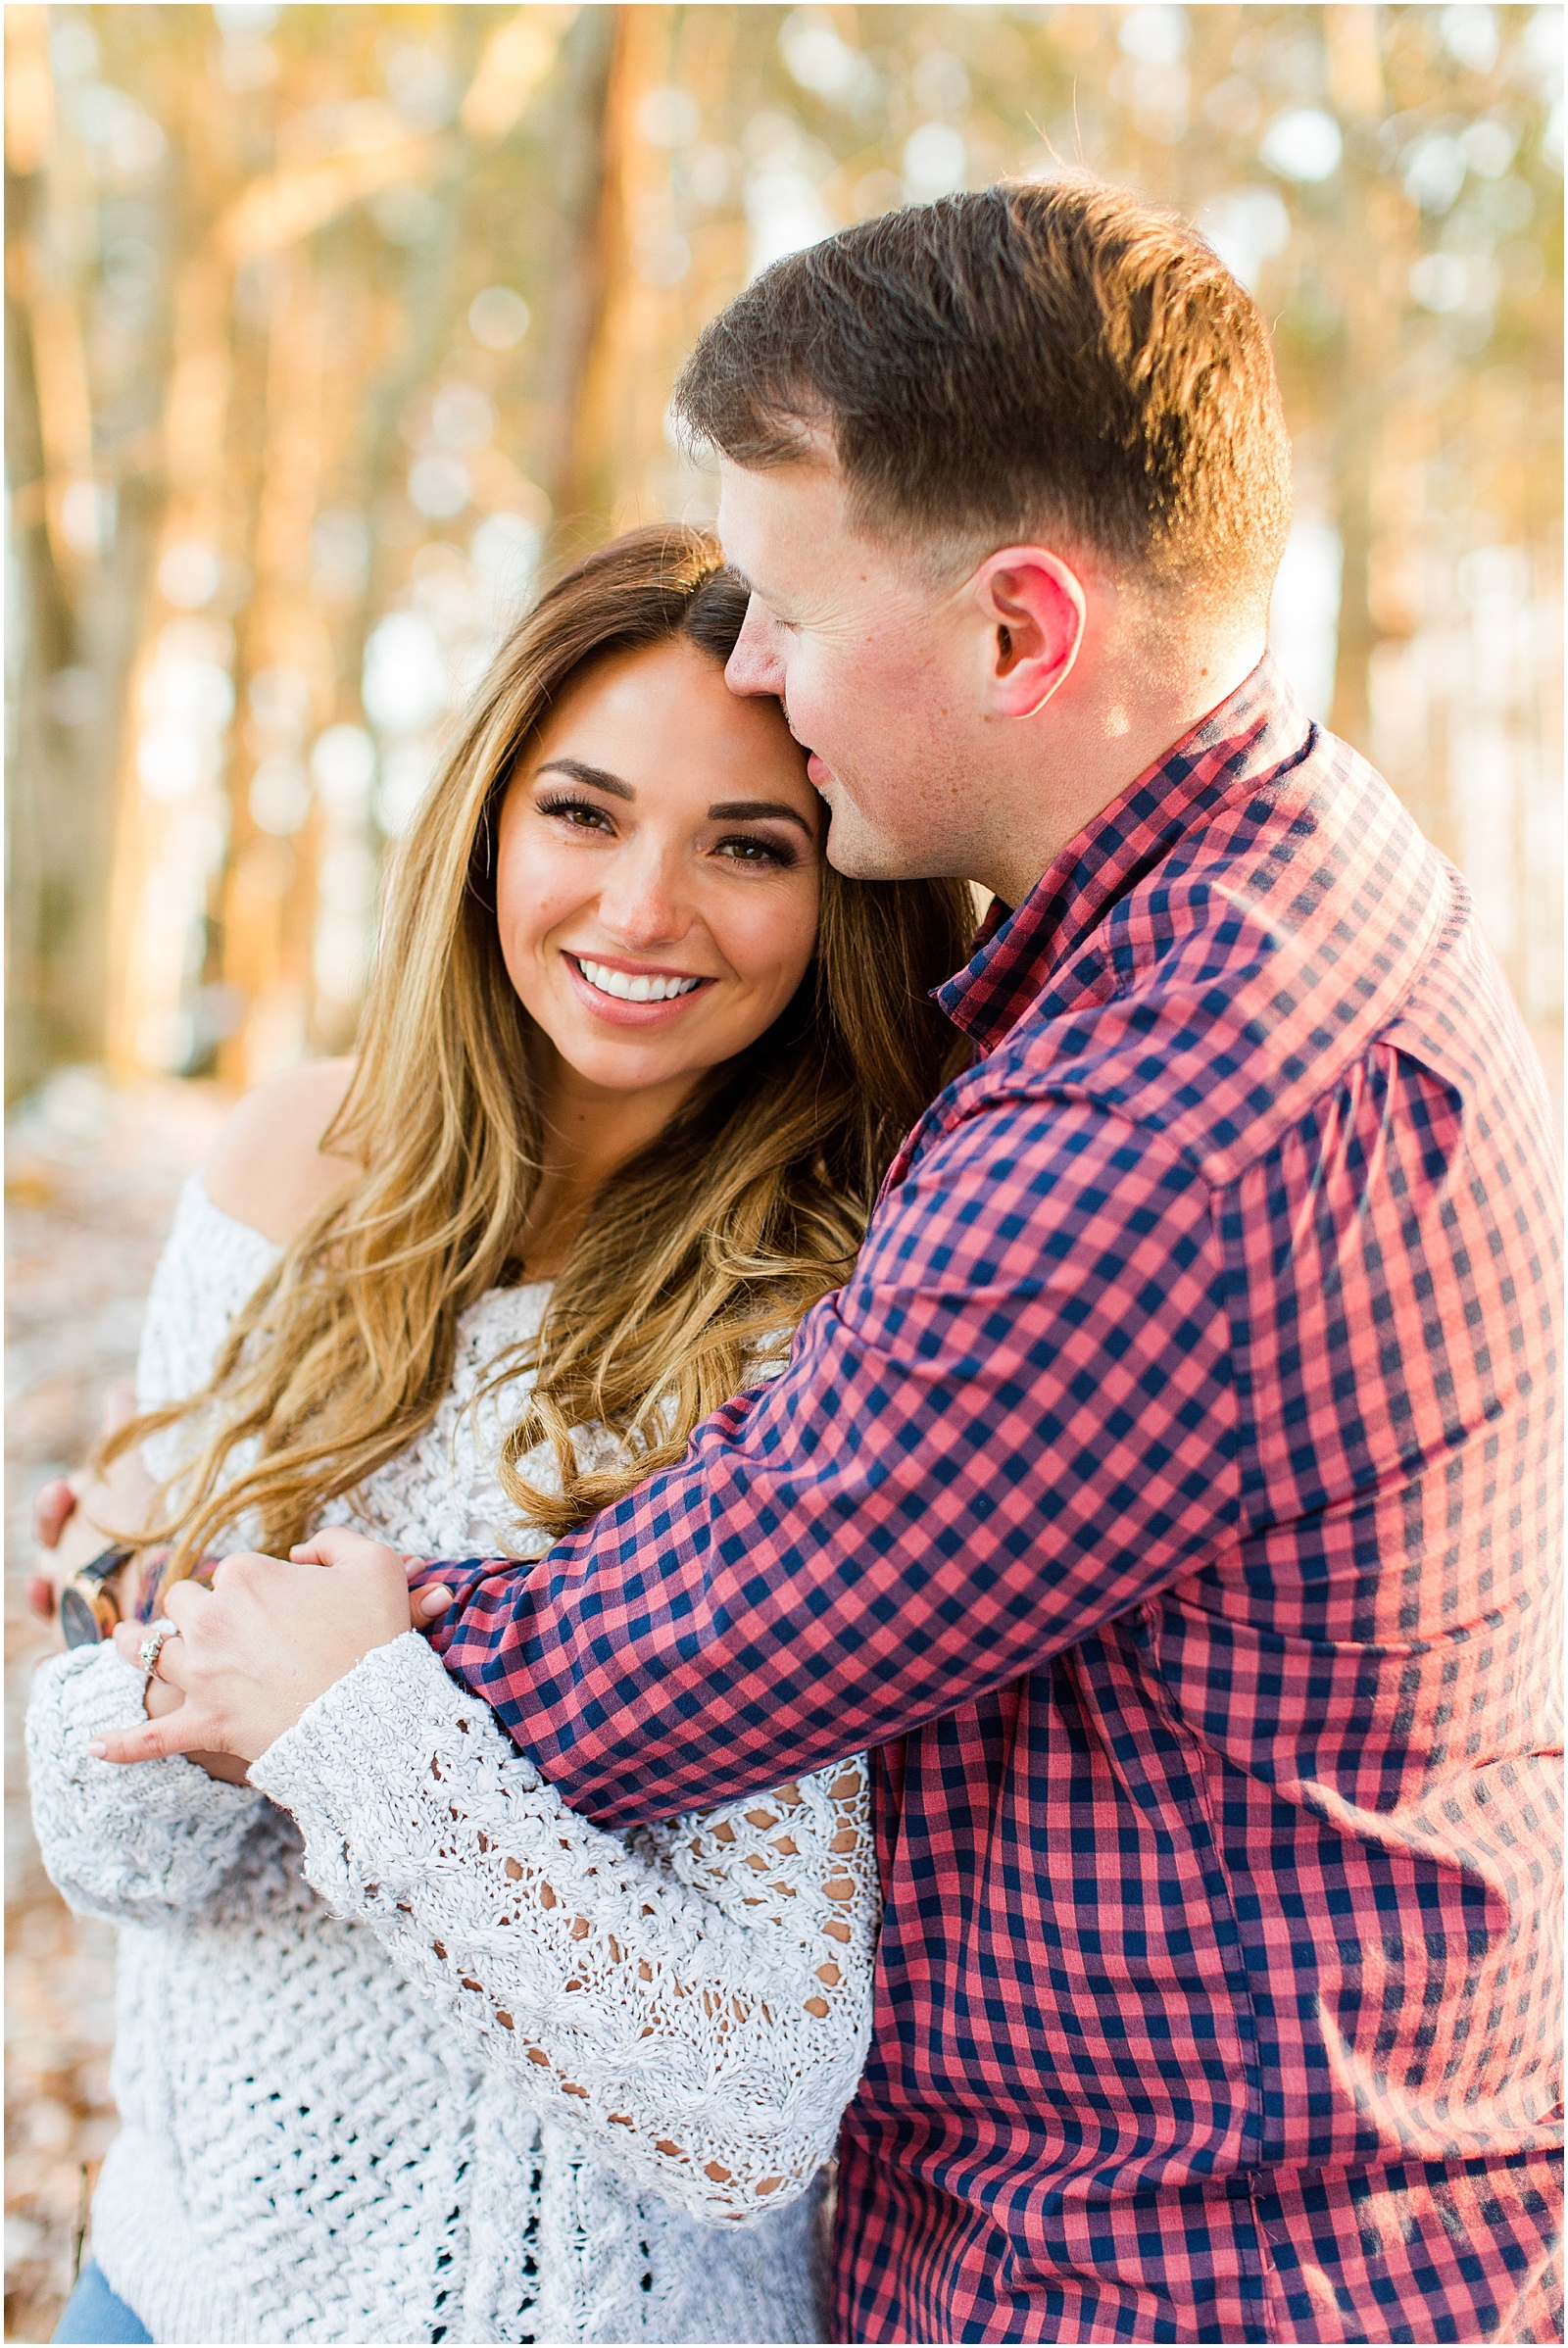 A Sunny Garden of the Gods Engagement Session | Shiloh and Lee | Bret and Brandie Photography041.jpg